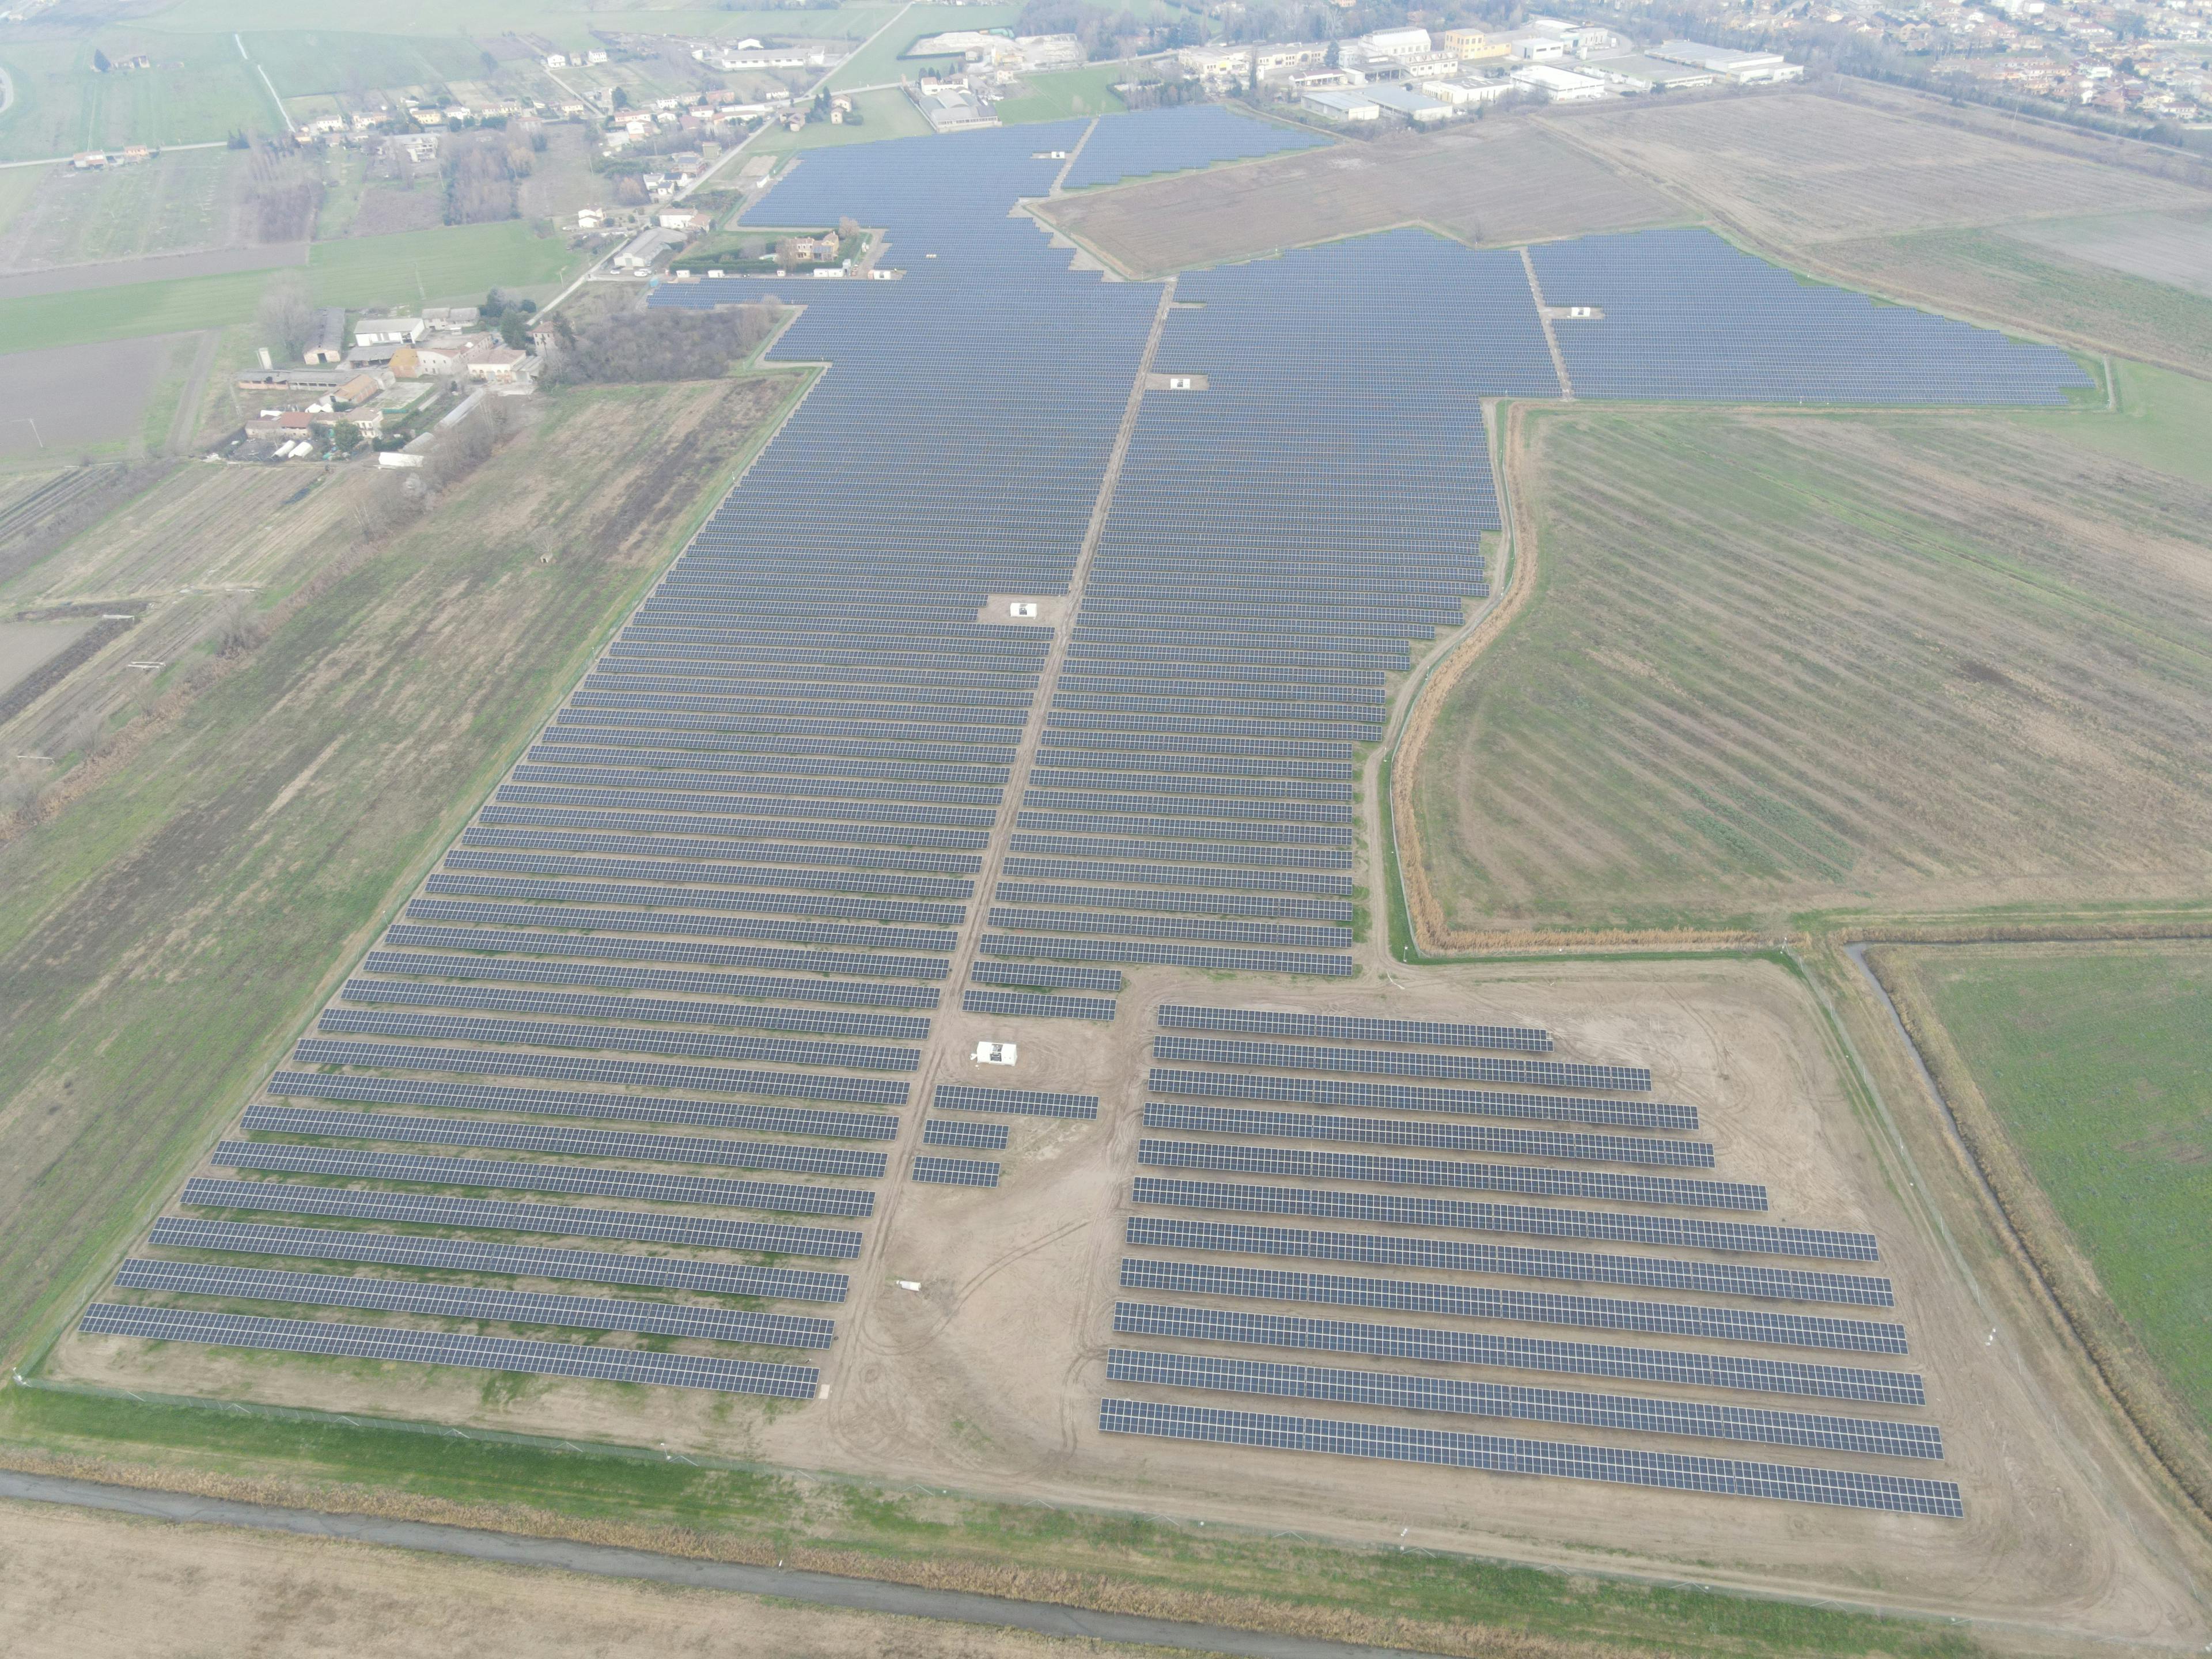 Freefield PV from a bird's perspective